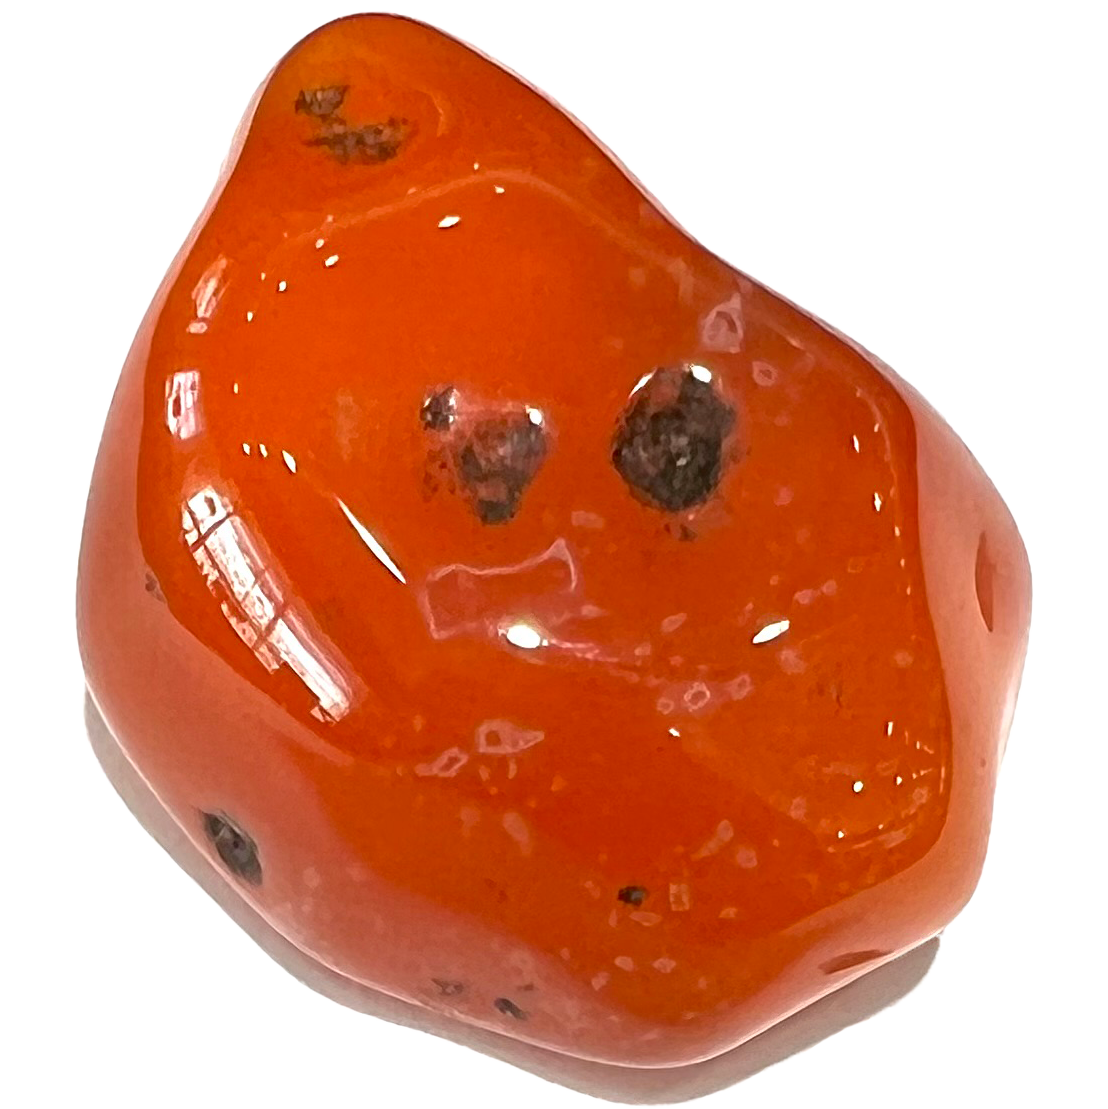 A tumbled carnelian stone.  The stone is bright orange with black pitting.